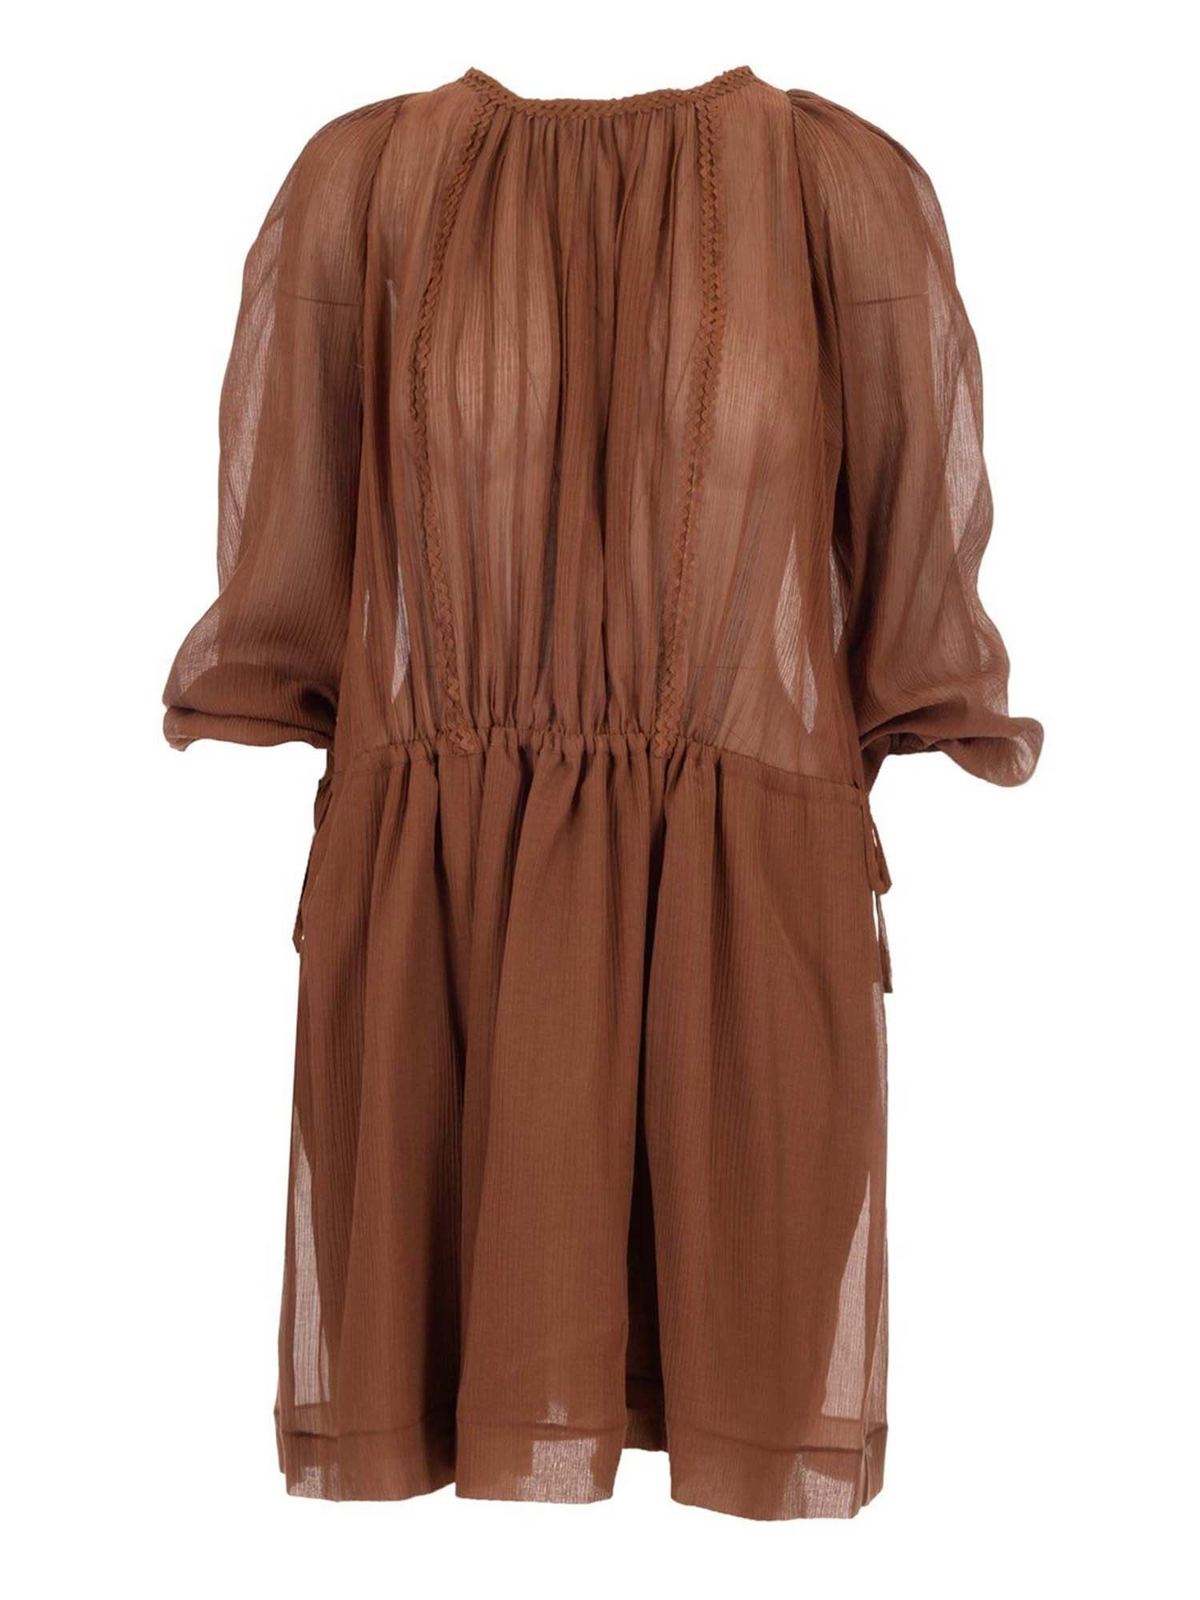 SEE BY CHLOÉ PINTUCK DRESS IN BROWN